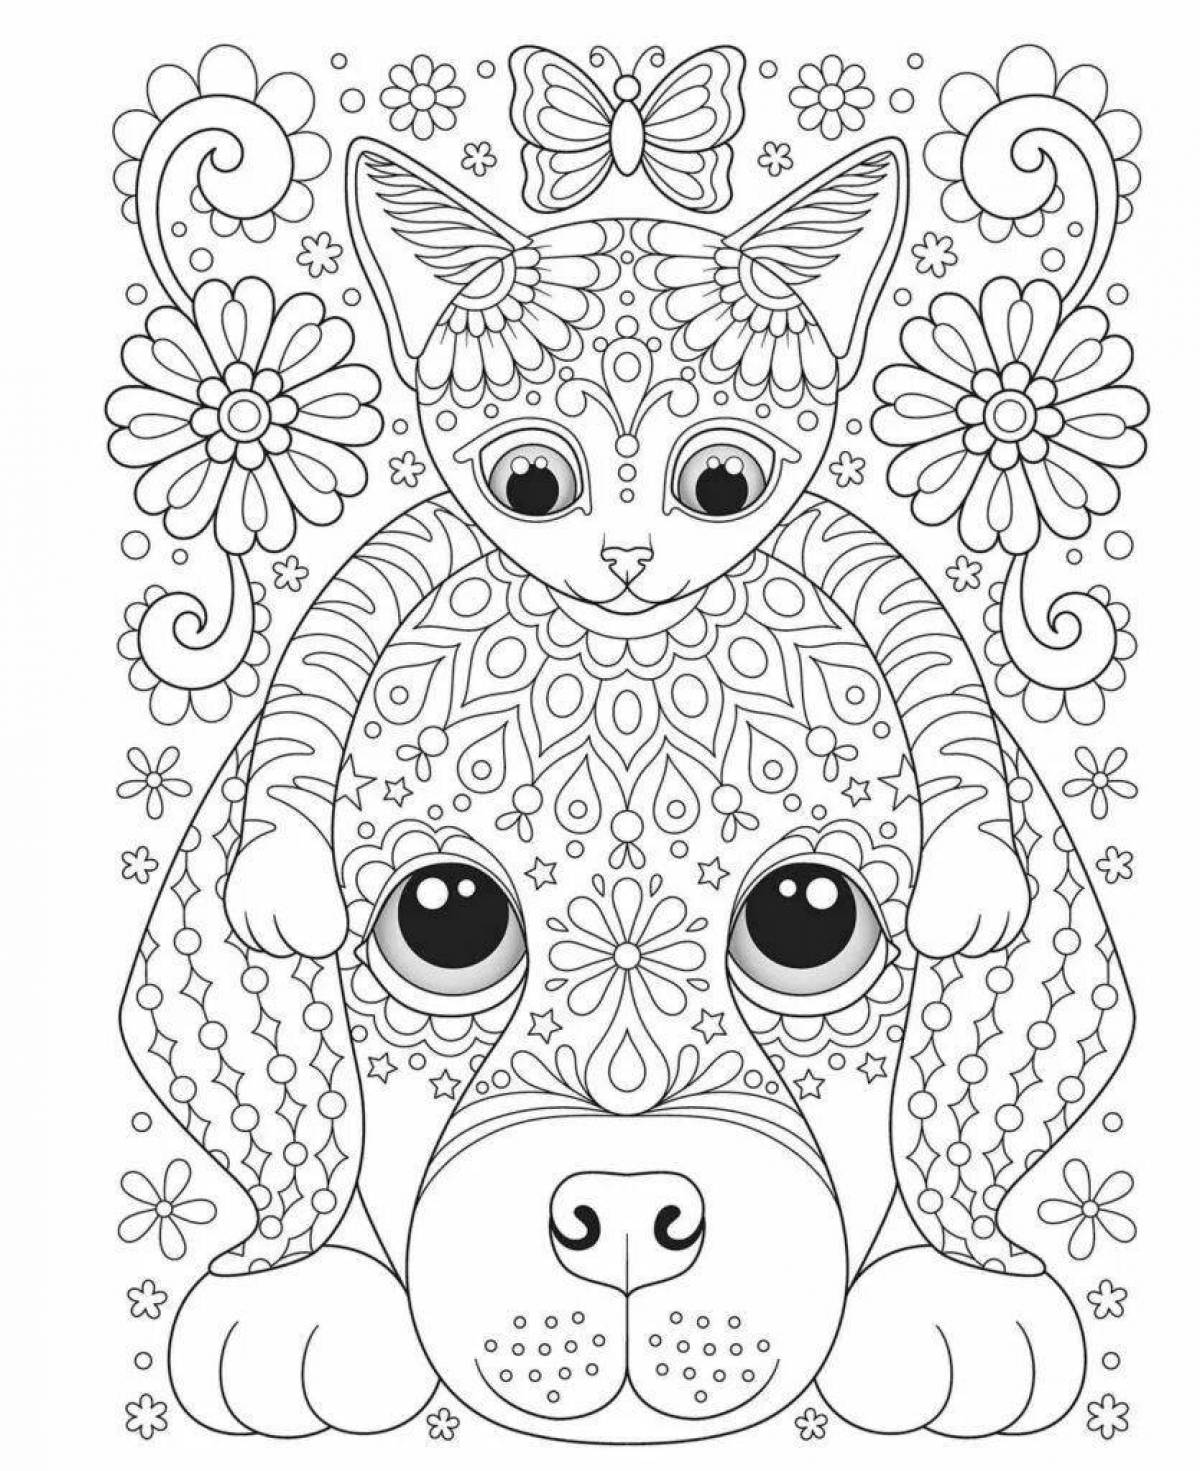 Cute animal coloring pages for 10-12 year olds